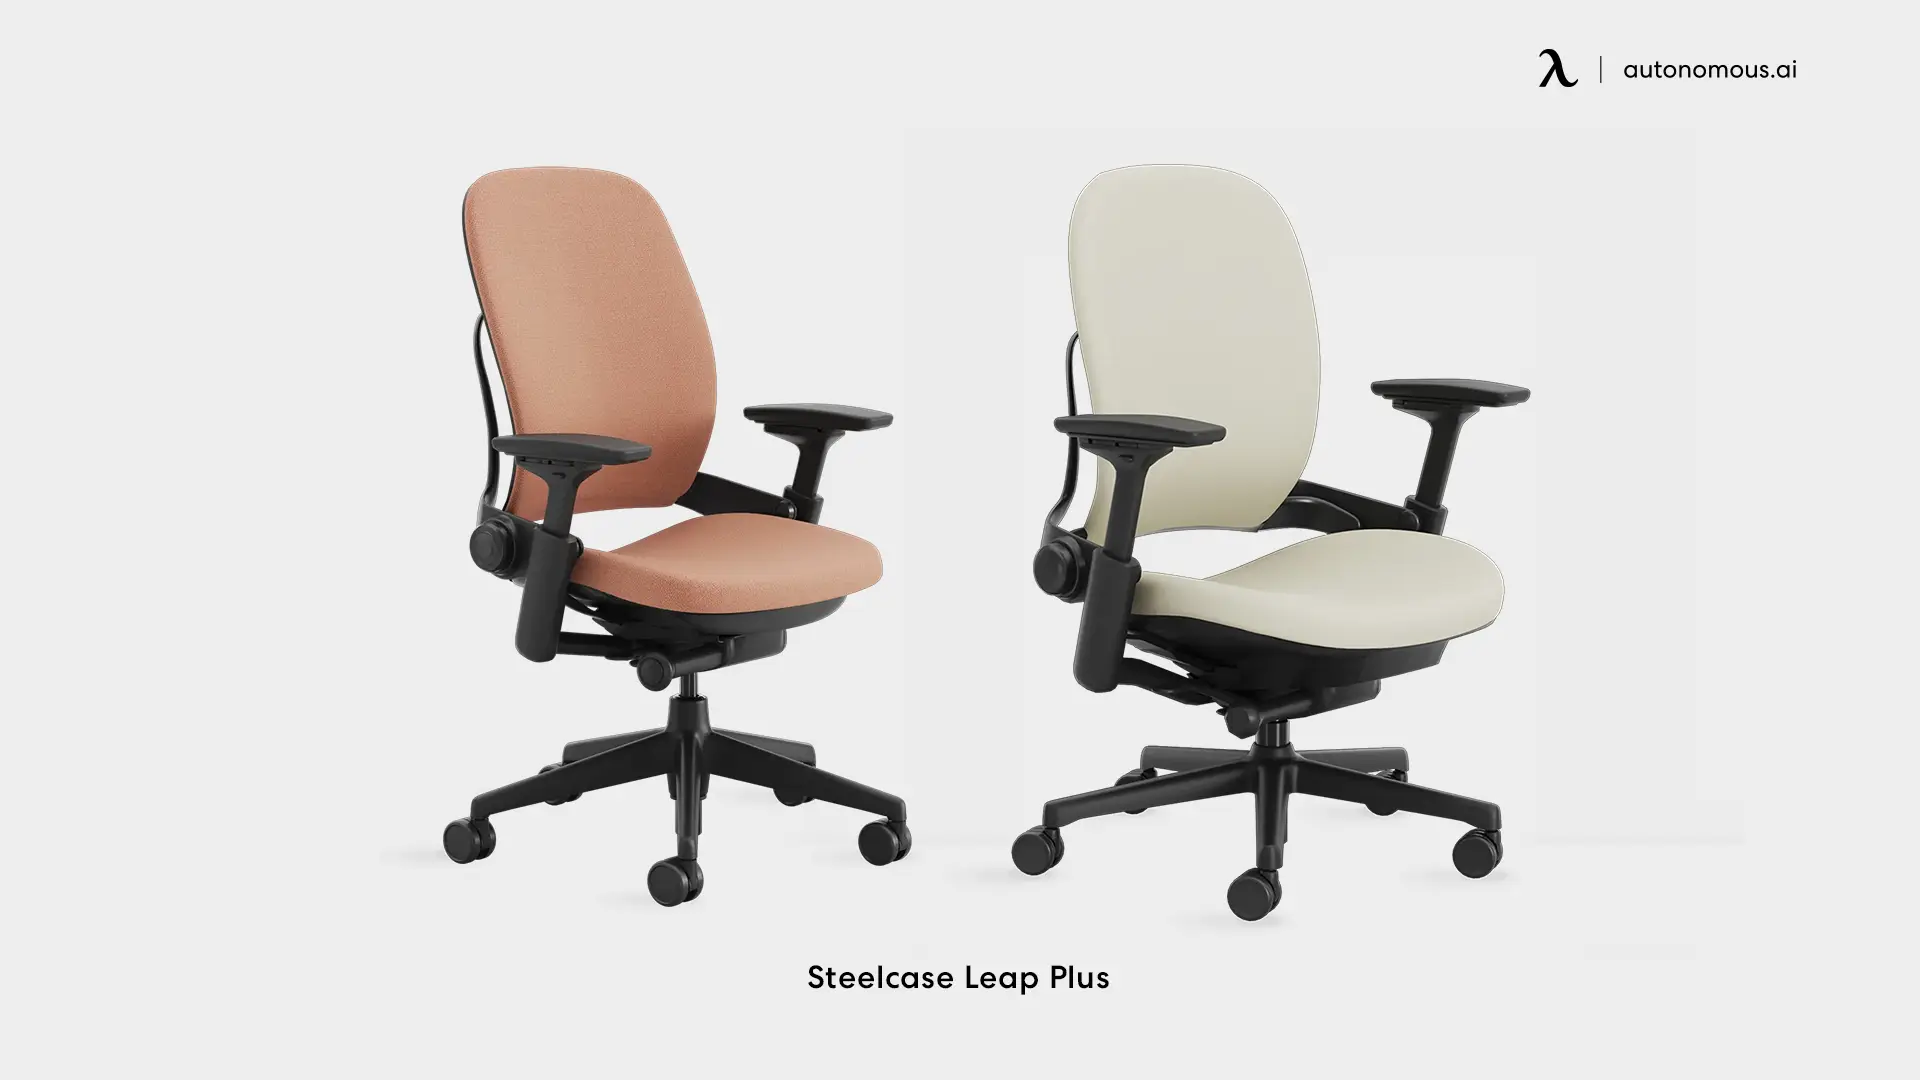 Steelcase Leap Plus - office chairs for 500 lb capacity